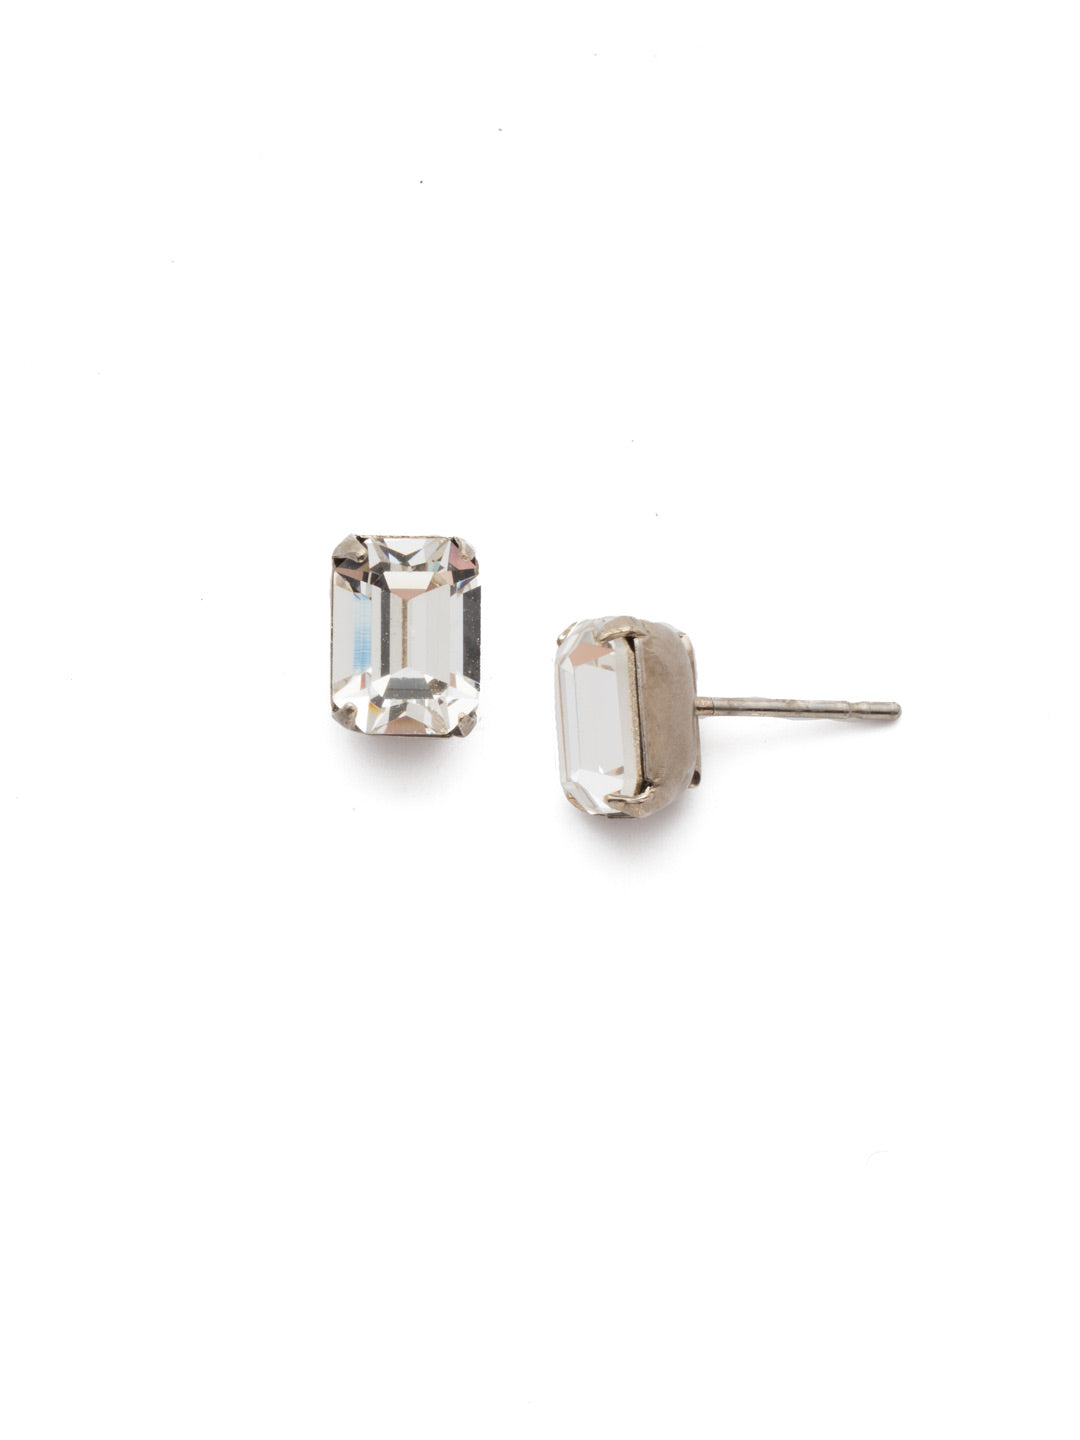 Mini Emerald Cut Stud Earrings - EBY42ASCRY - <p>Simply sophisticated. The mini emerald cut stud earrings can be worn alone or paired with anything for an extra accent to any wardrobe. From Sorrelli's Crystal collection in our Antique Silver-tone finish.</p>